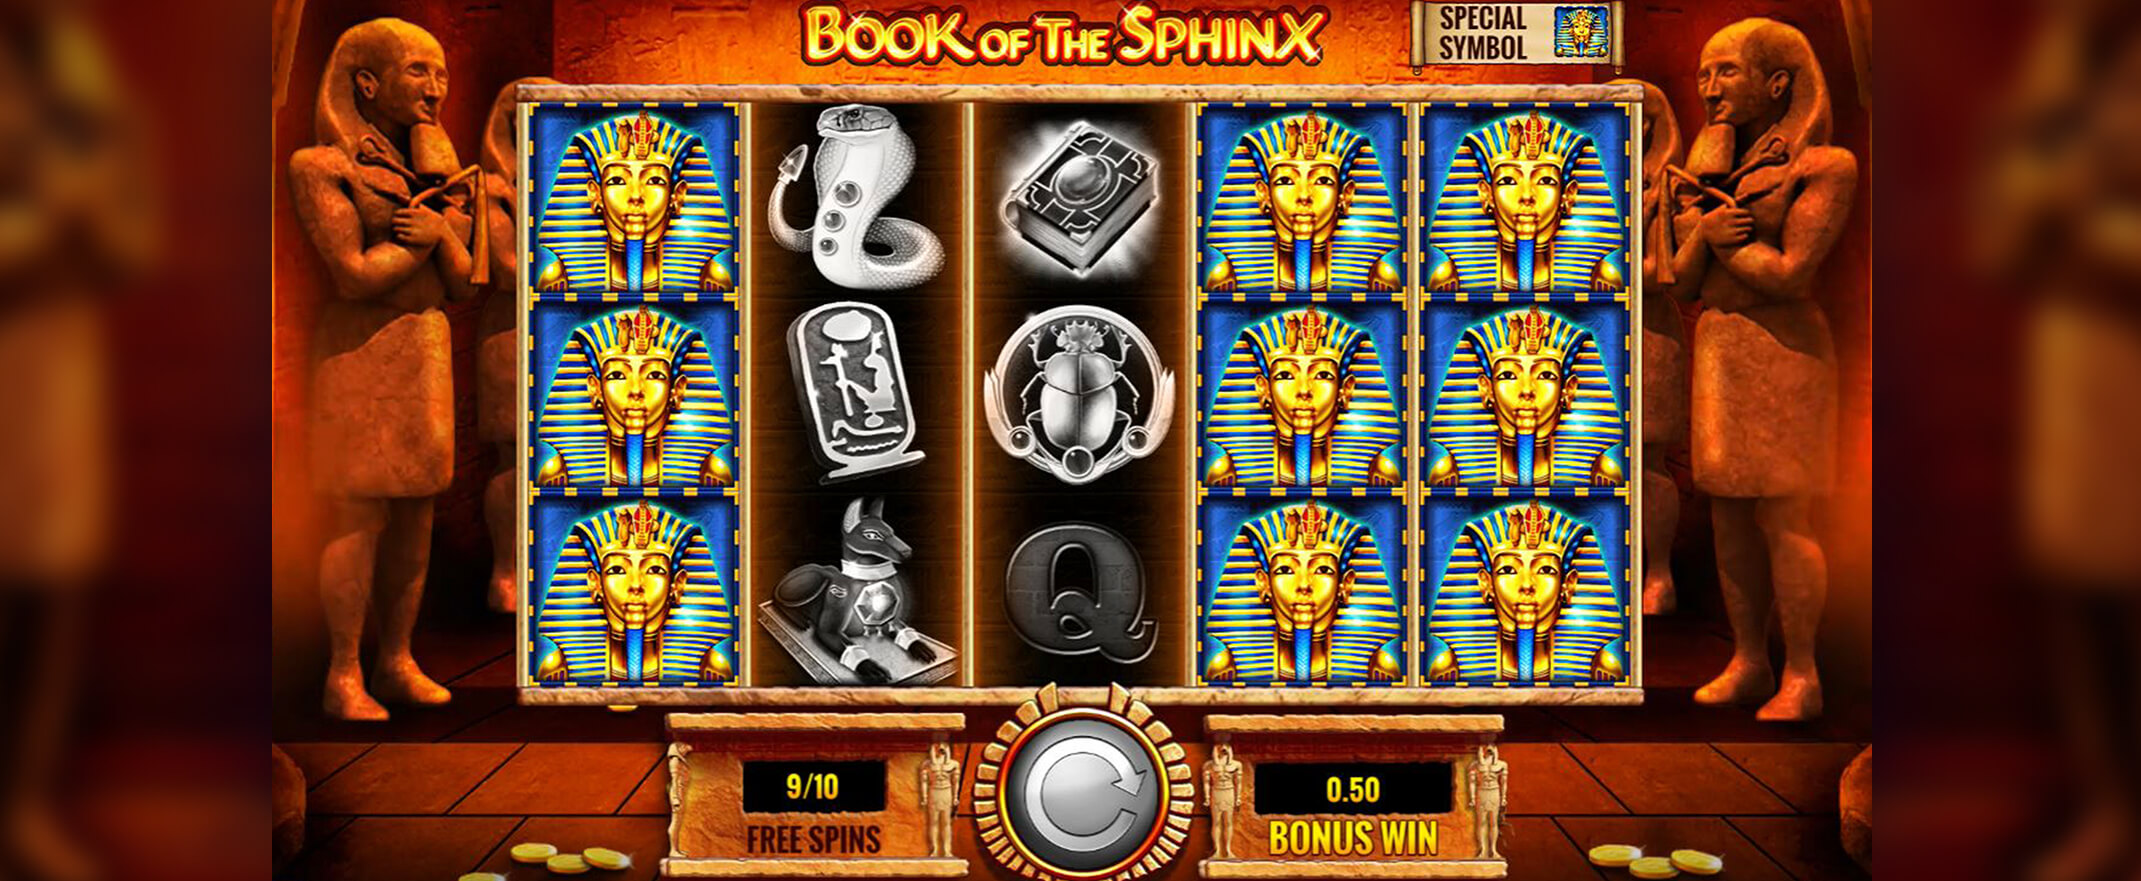 Book of the Sphinx Slot Review, image of the reels and symbols